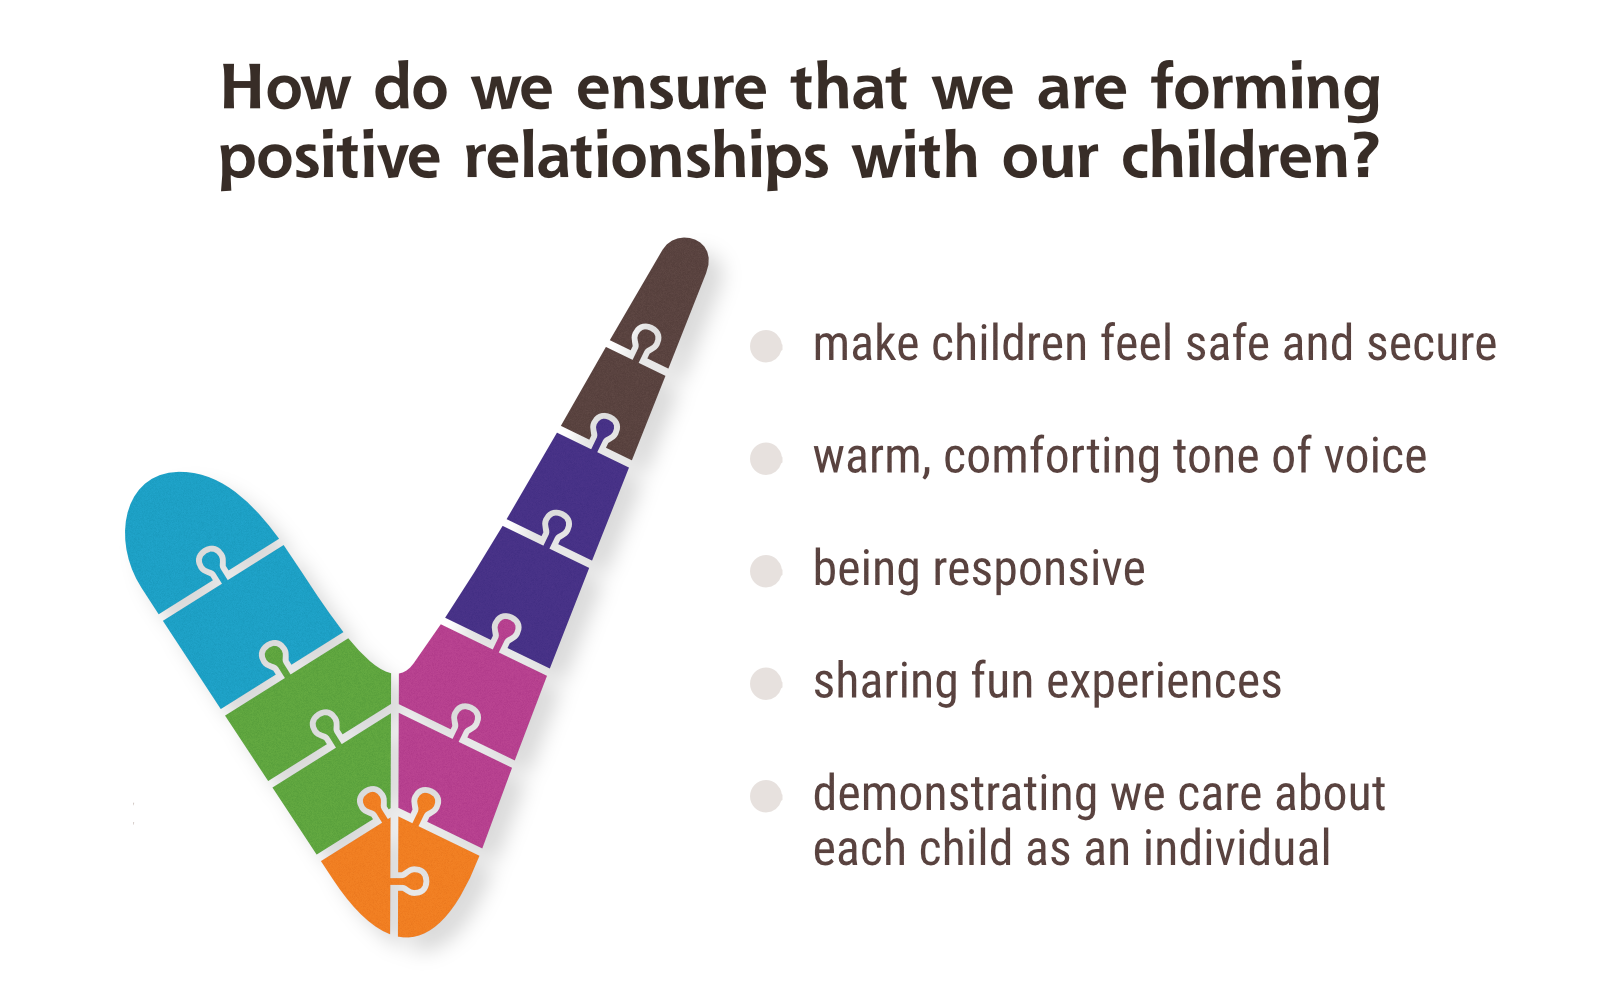 Forming Positive Relationships with Our Children